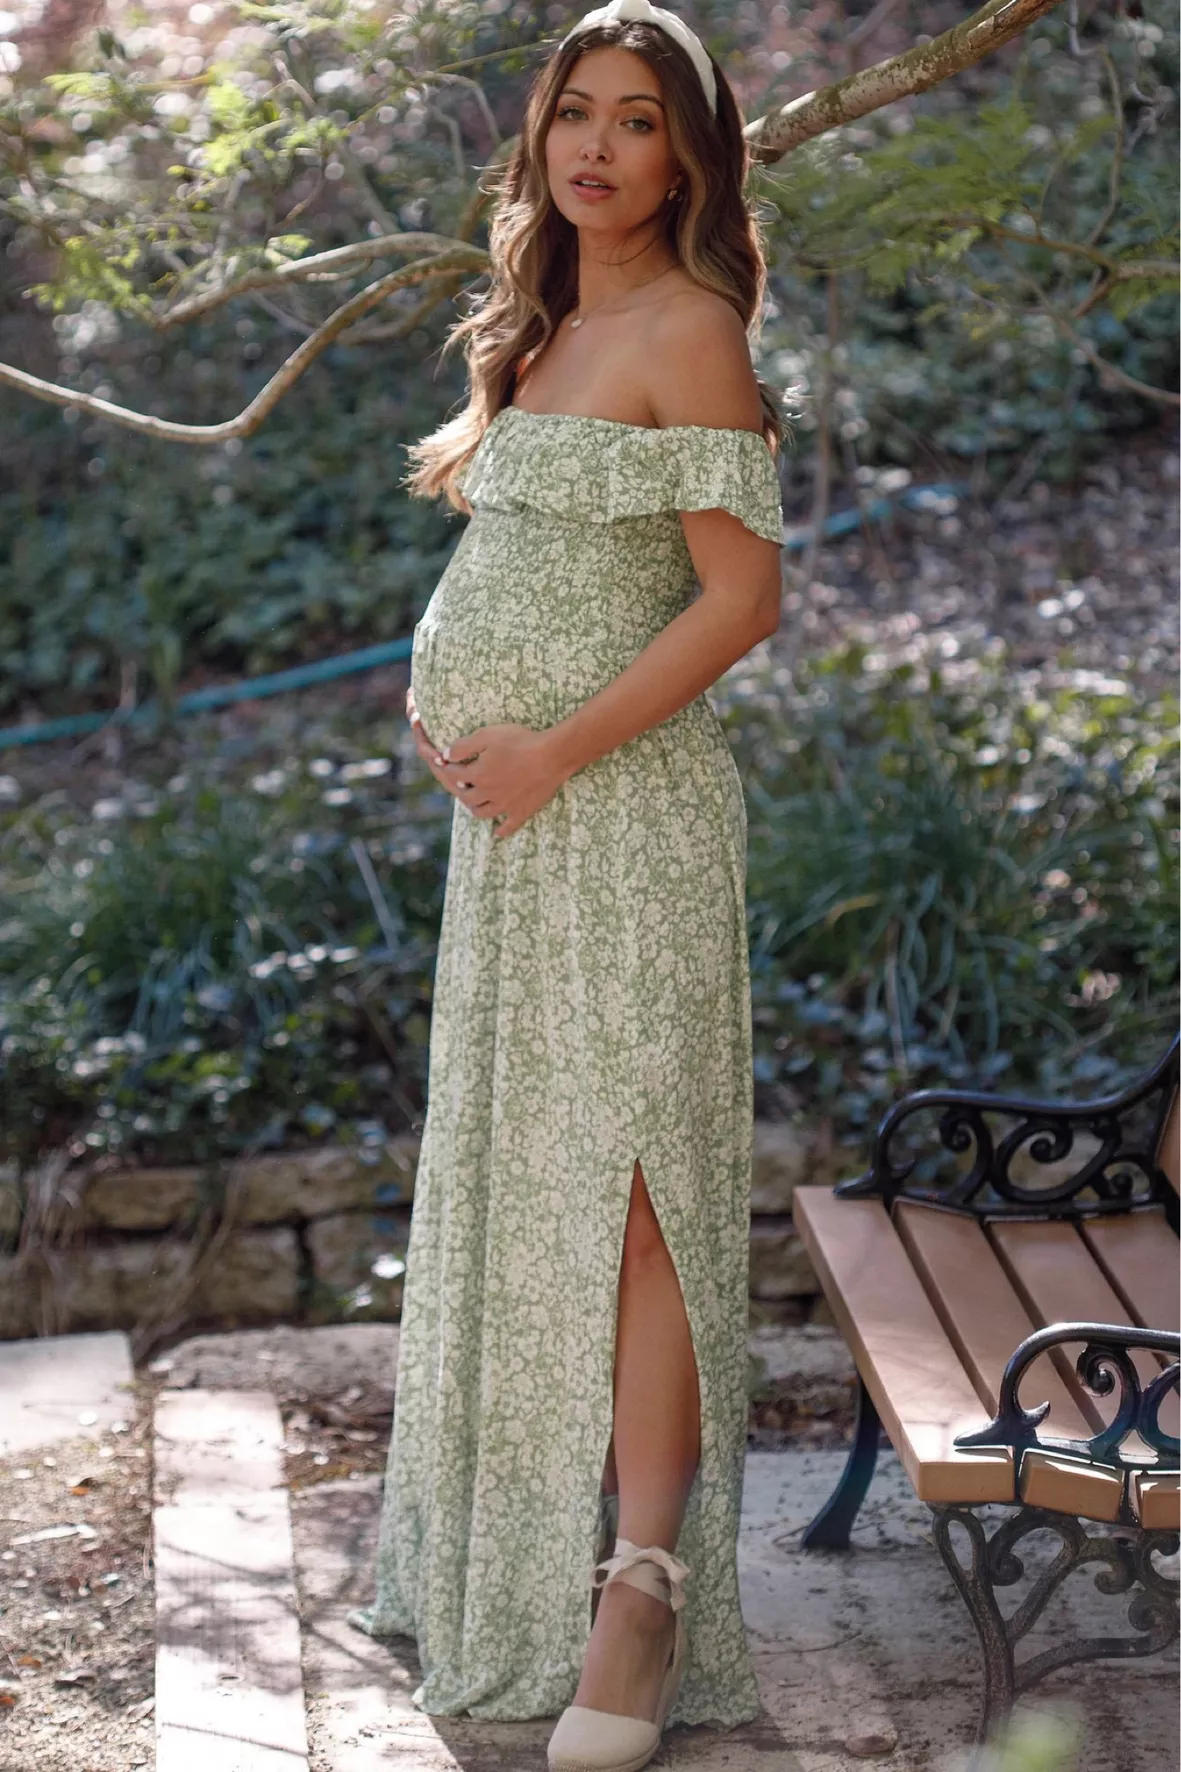 Maternity Dresses to Wear All Spring and Summer Long